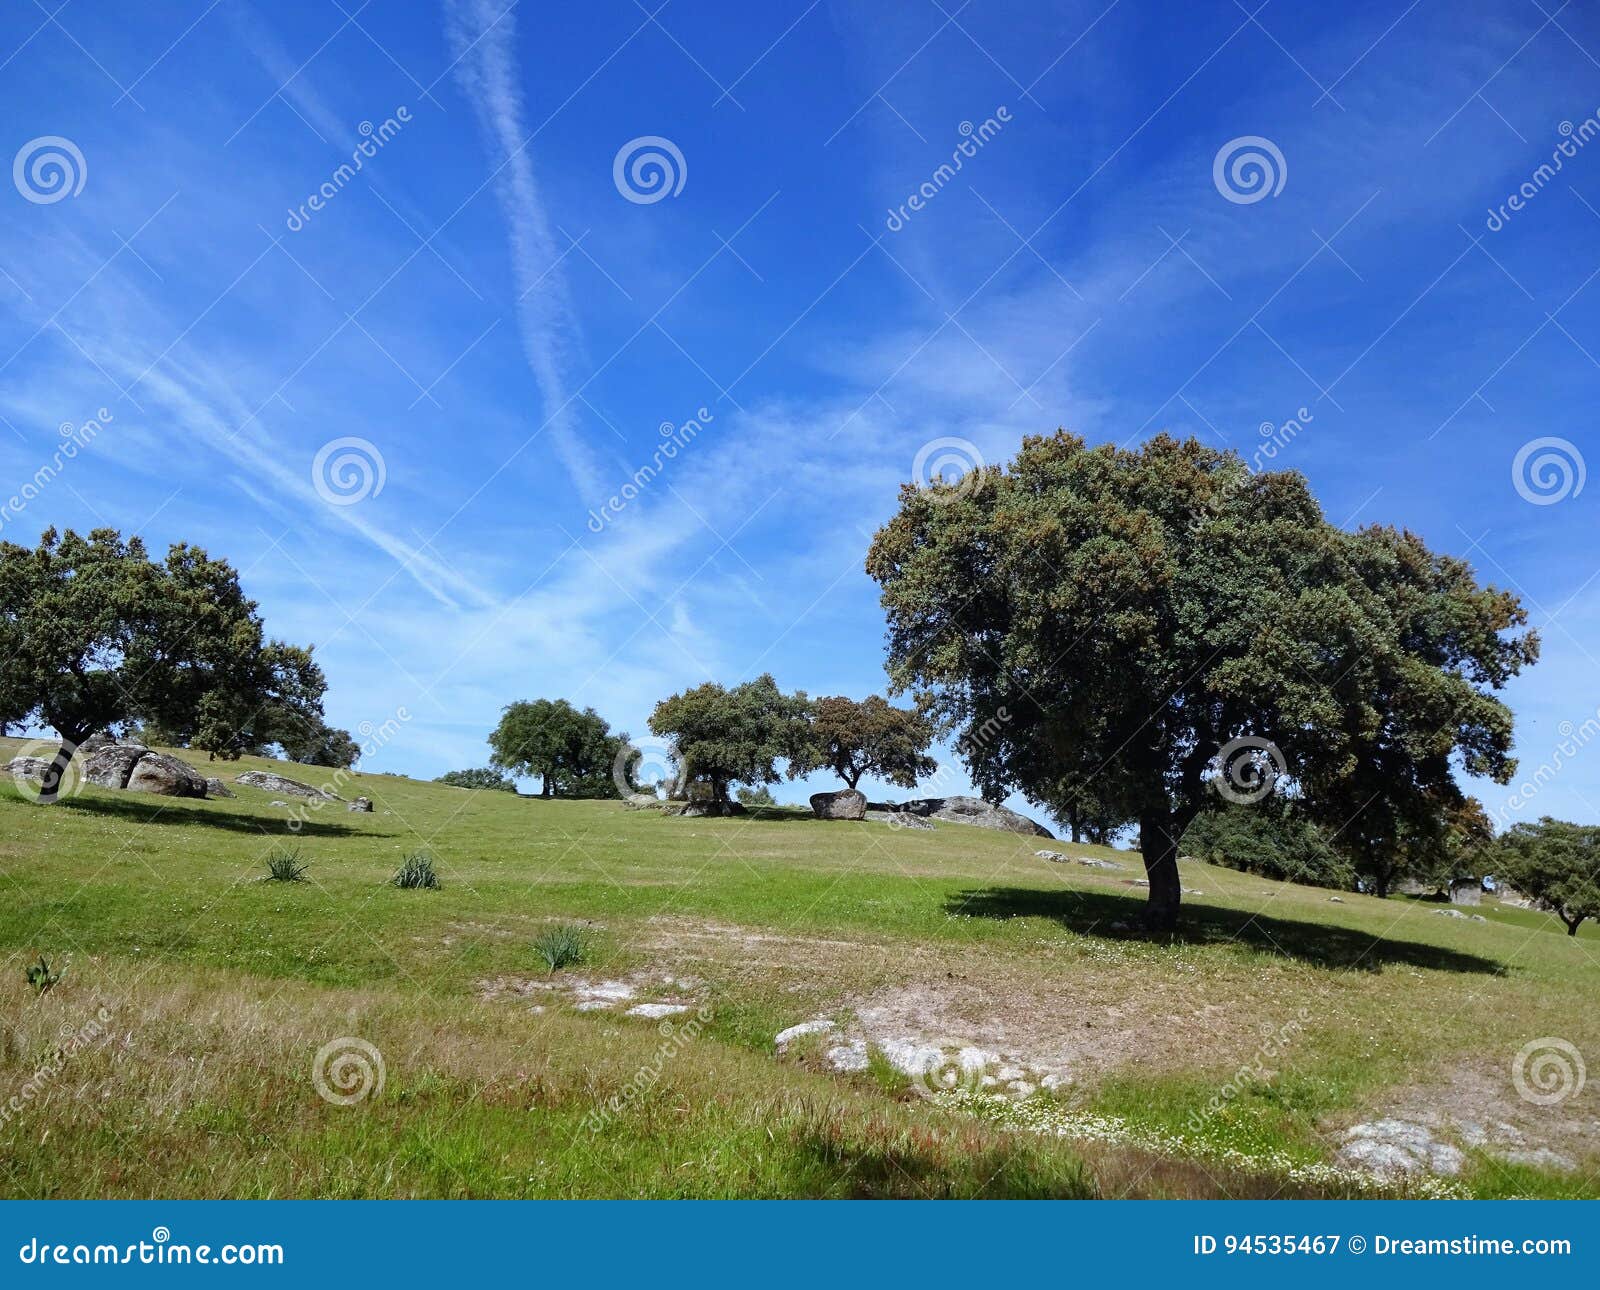 meadow in extremadura